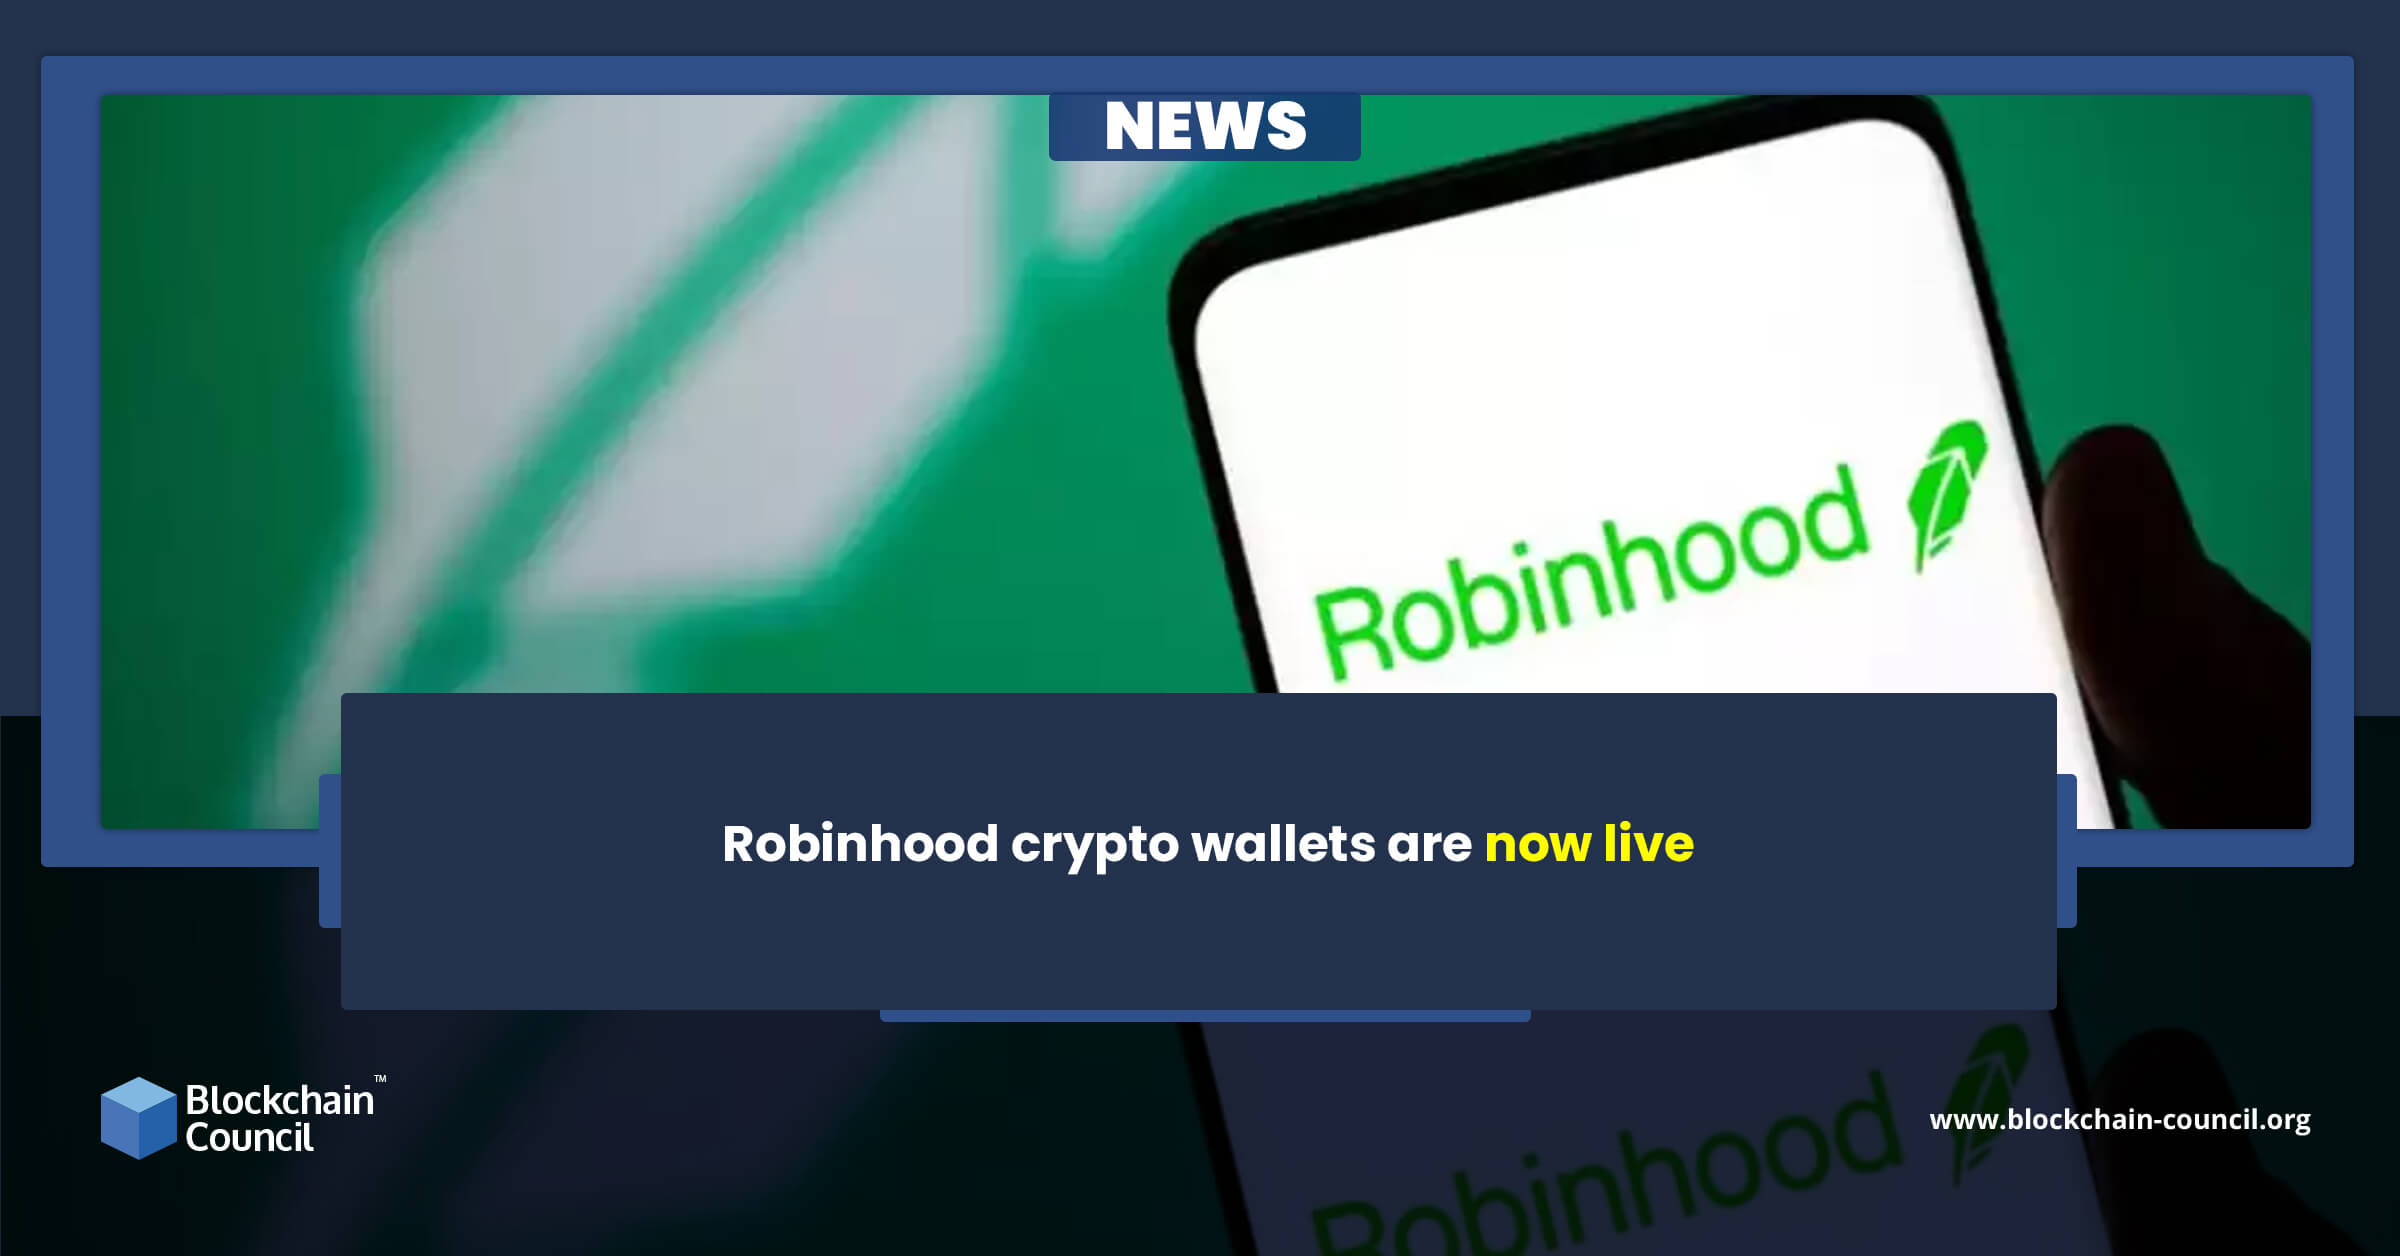 Robinhood crypto wallets are now live